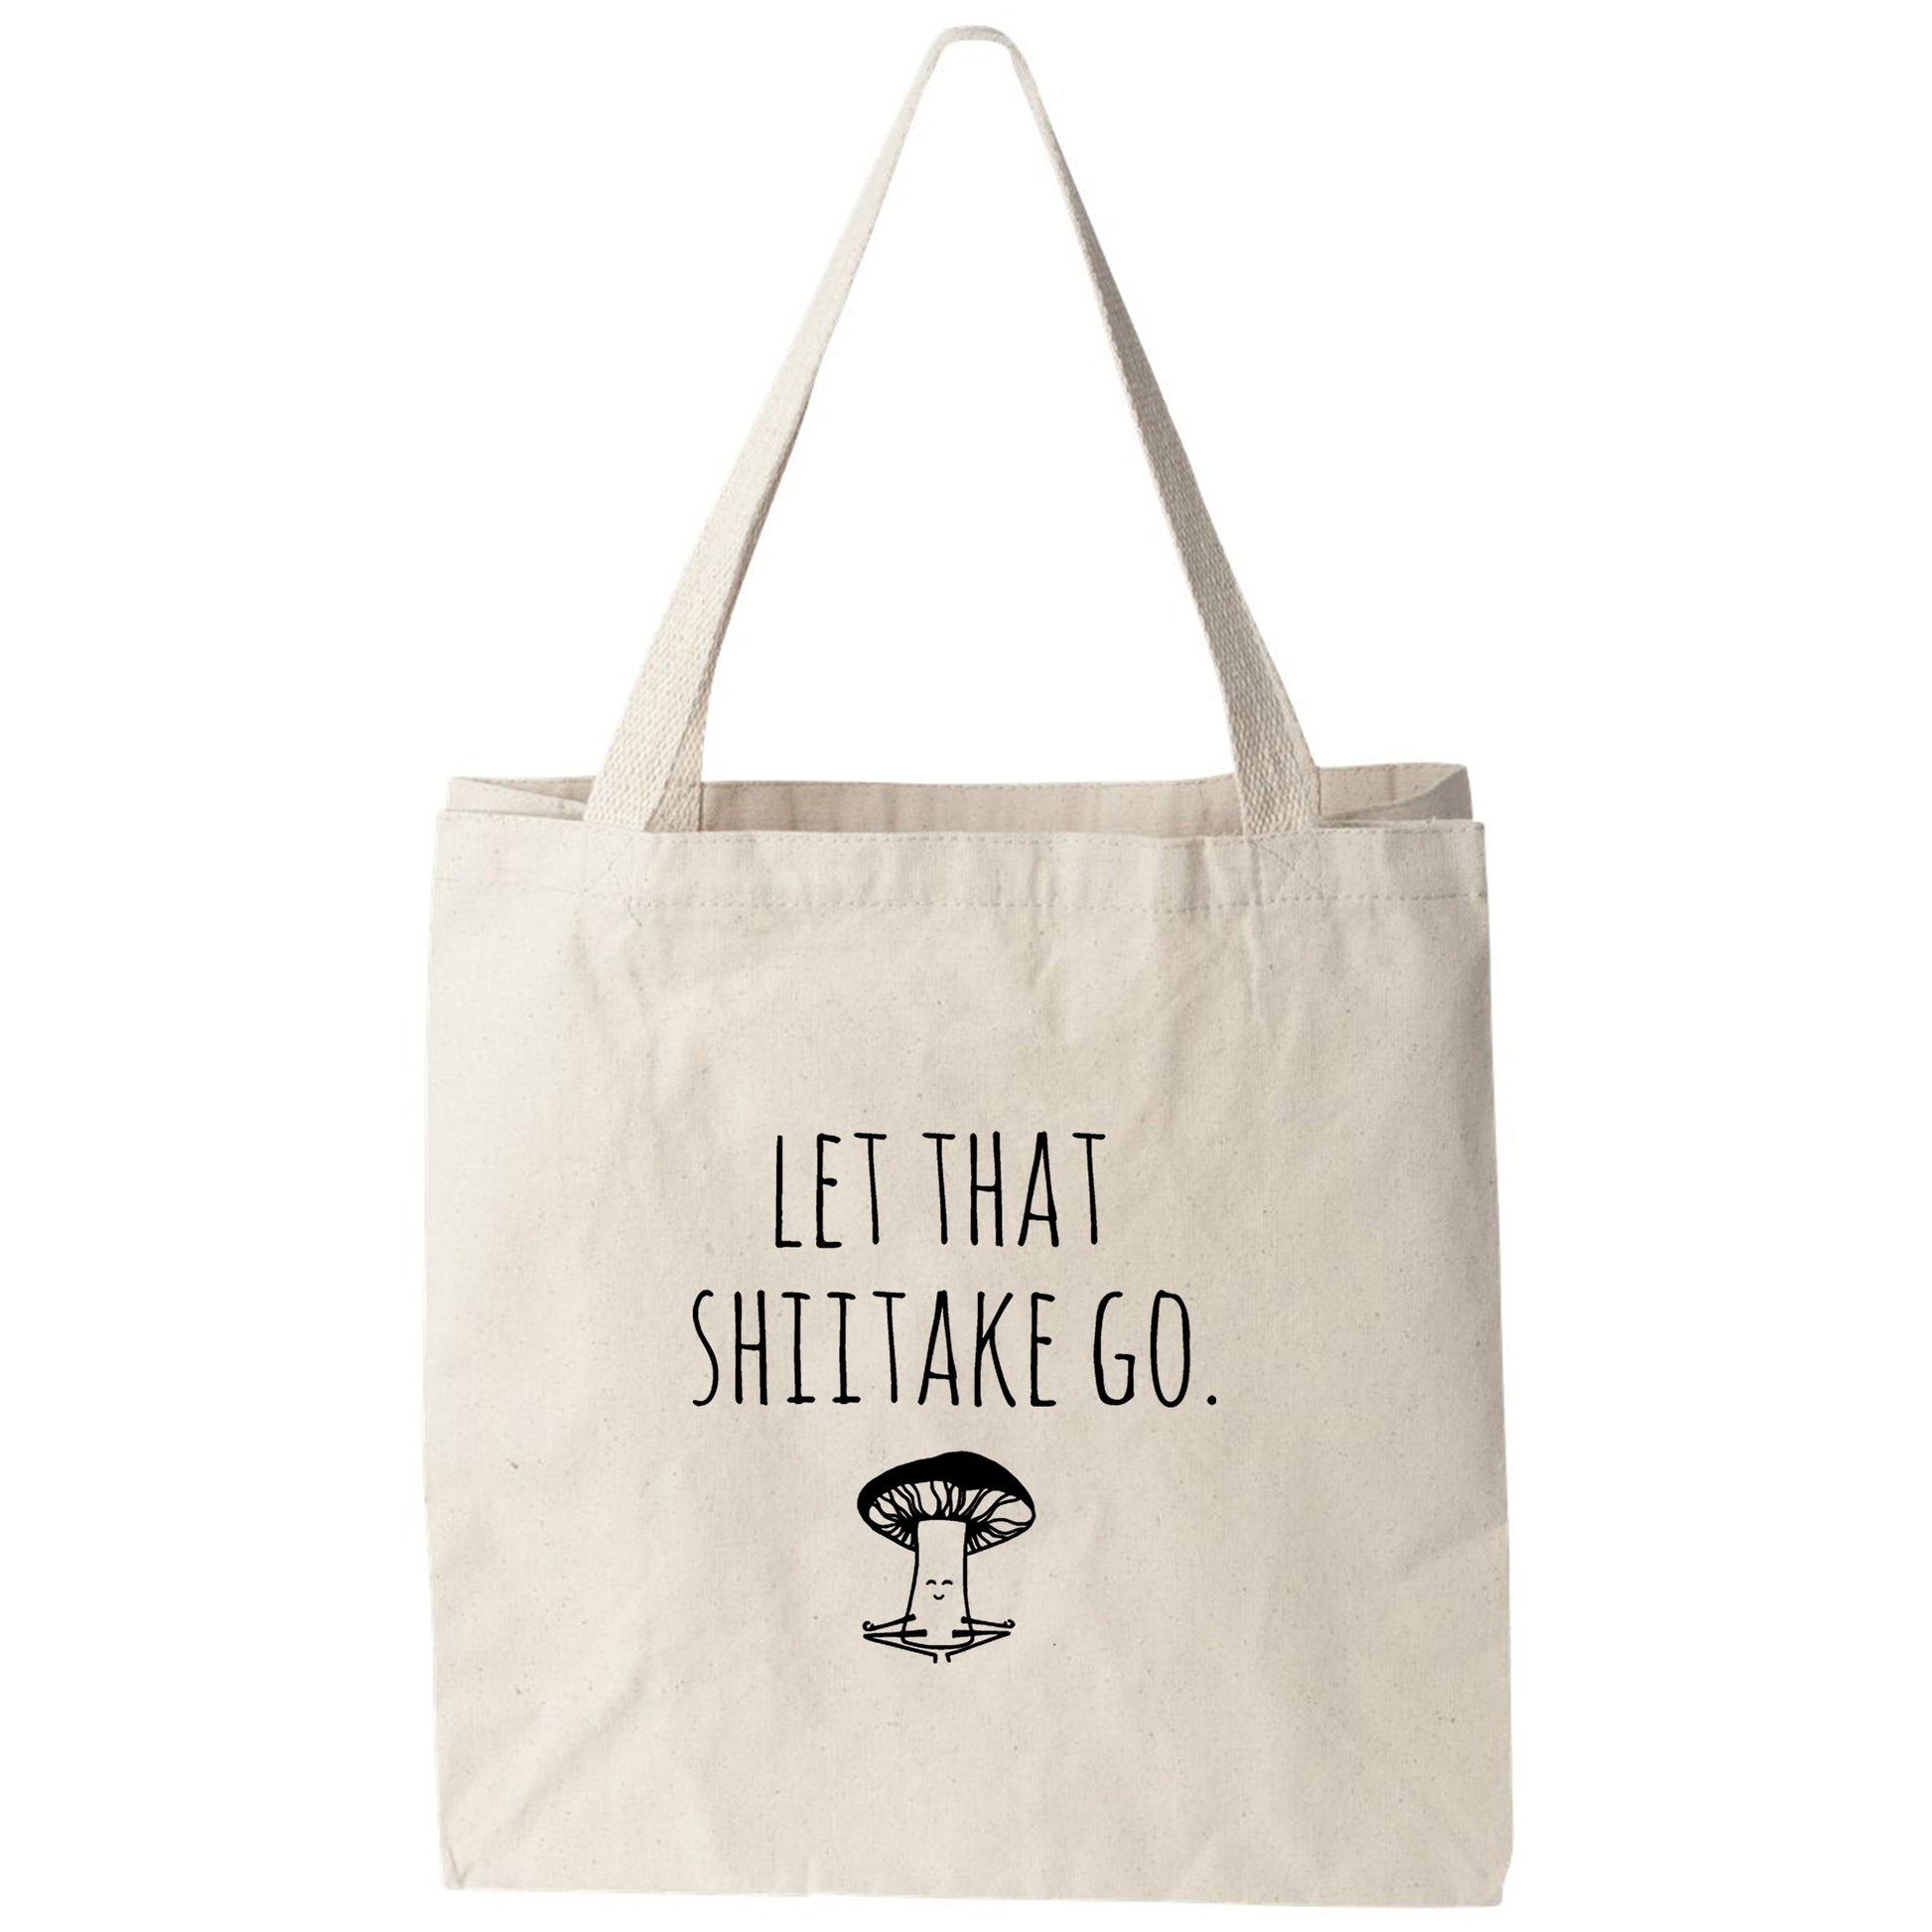 a tote bag that says let that shit take go